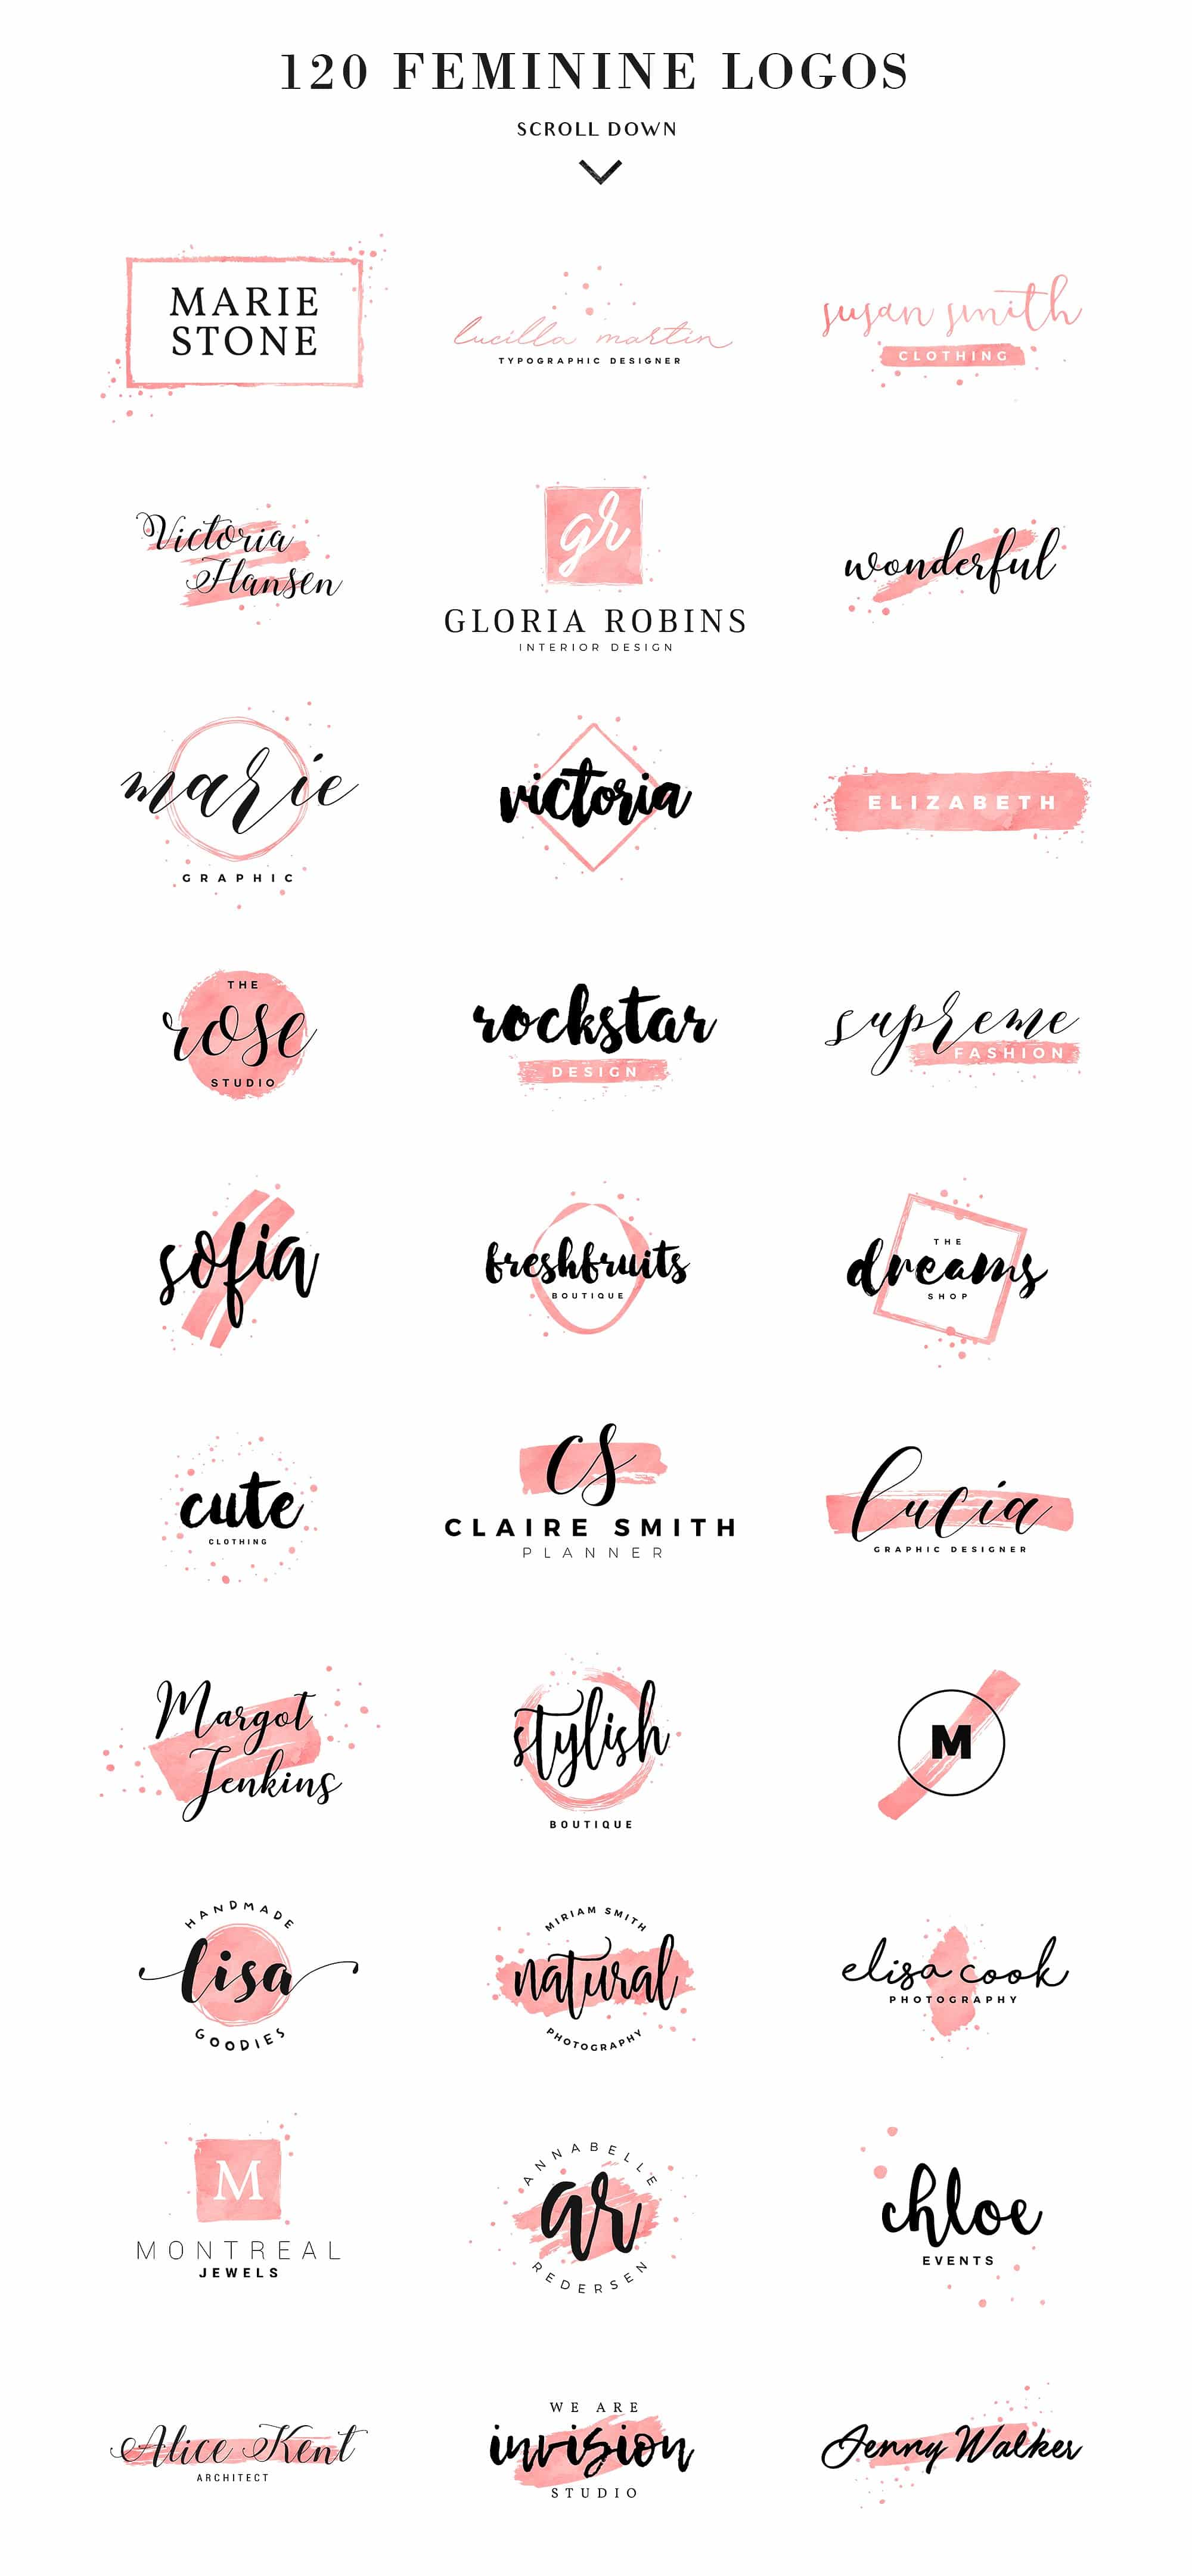 Feminine Branding Logos by David Bassu is a beautiful collection of premium blog style feminine logo templates. Includes 120 feminine modern logos you can customize using Photoshop & Illustrator. Bonus: 25 high quality textures that will really spice up your logo design. Shop online at Jennifer-Franklin.com/shop.